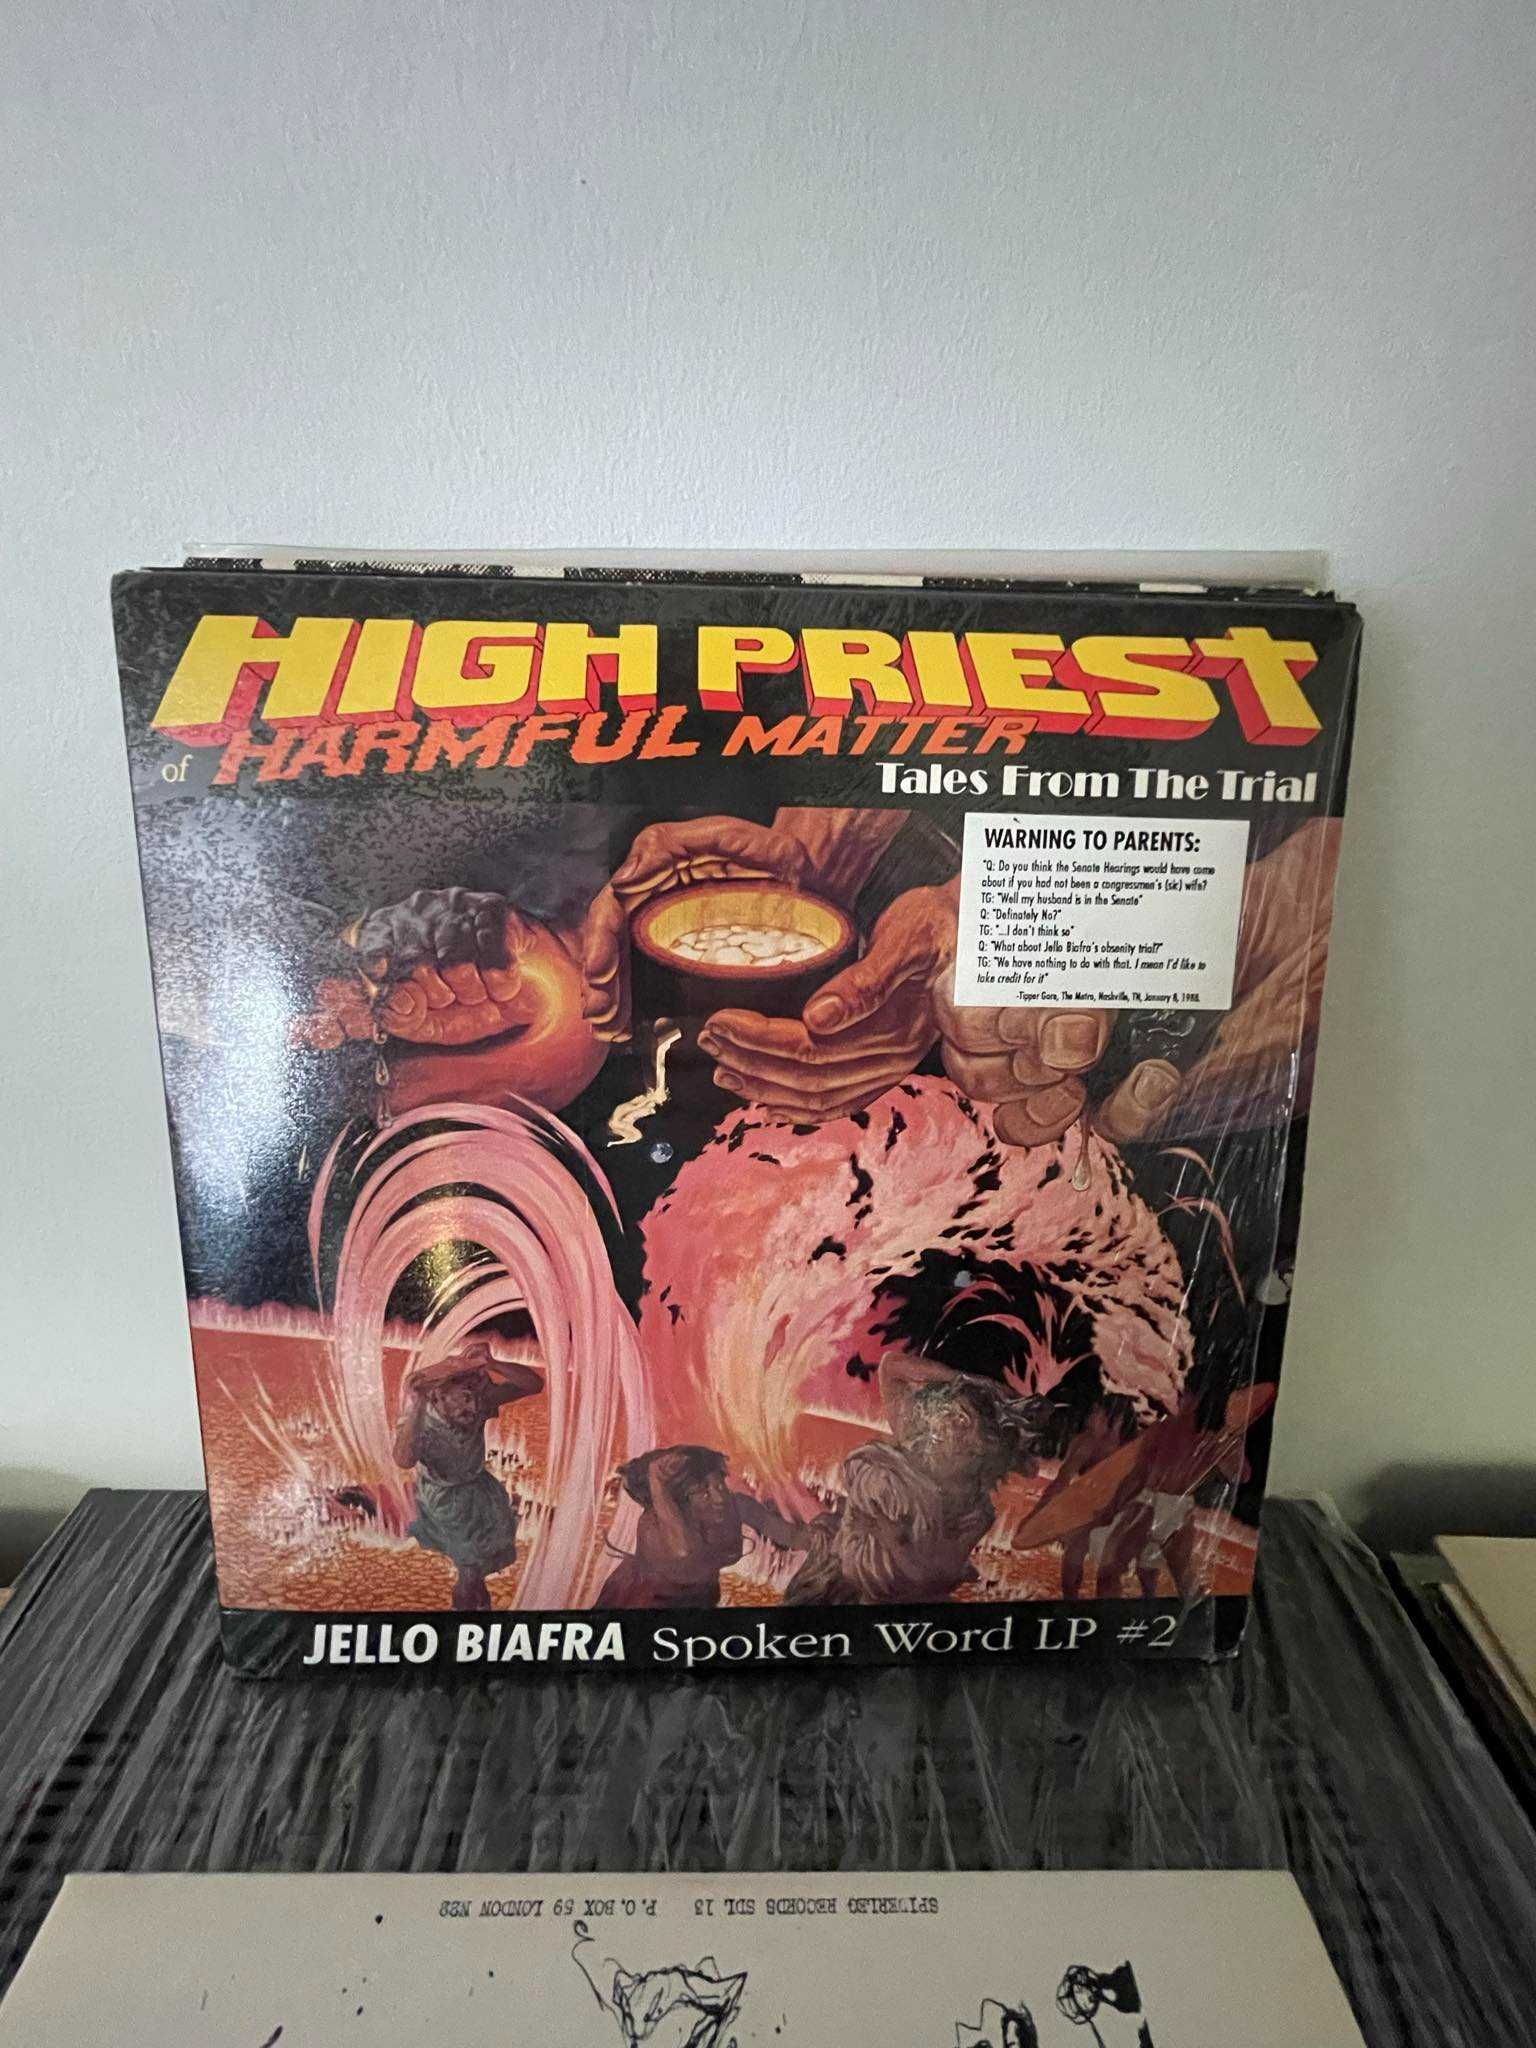 Jello Biafra – High Priest Of Harmful Matter - Tales From The Trial